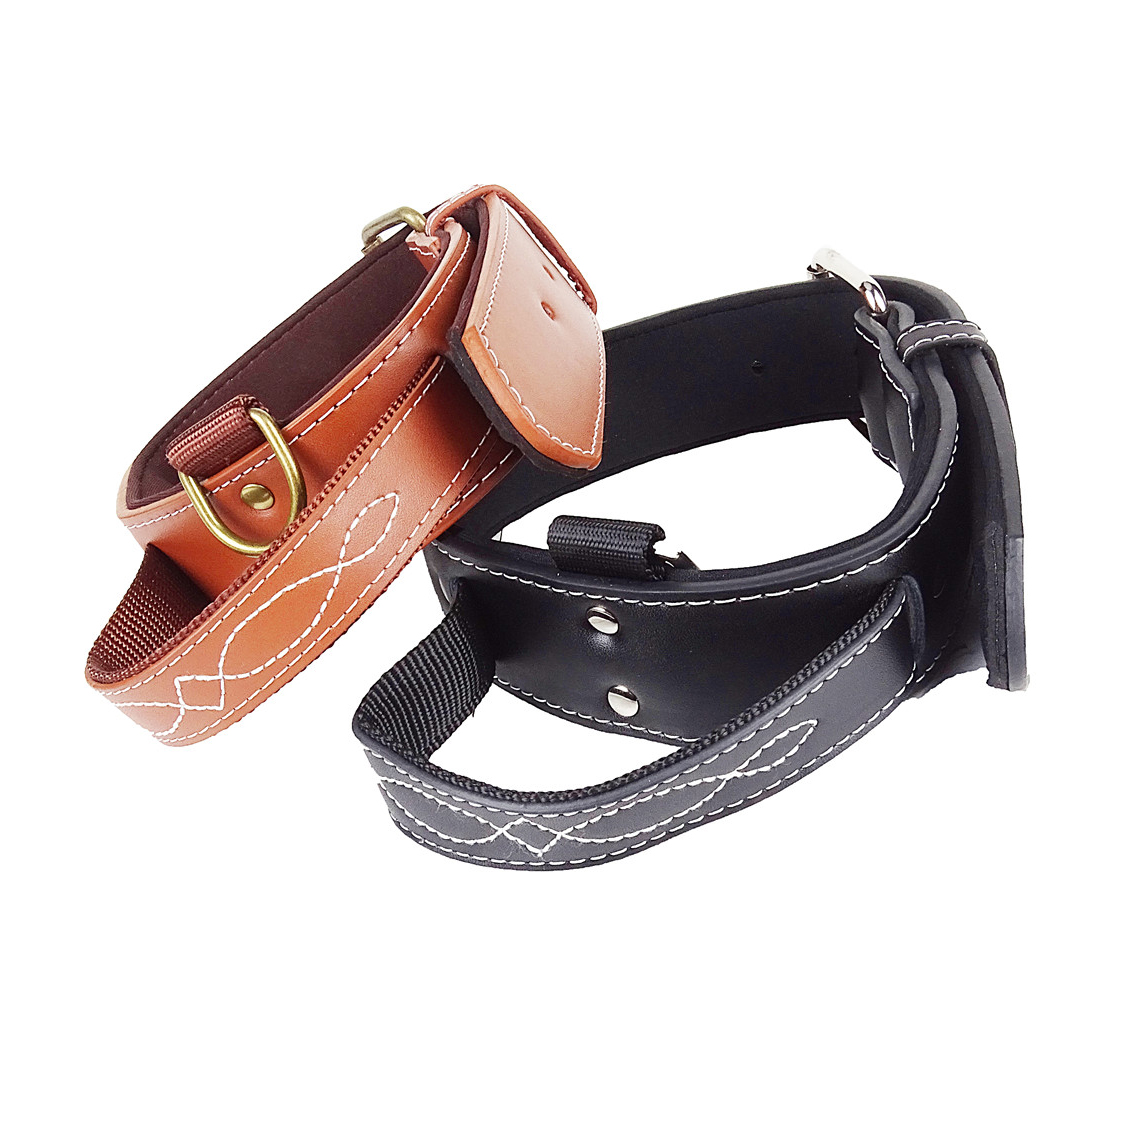 Real leather safety durable dog handle collar for sale